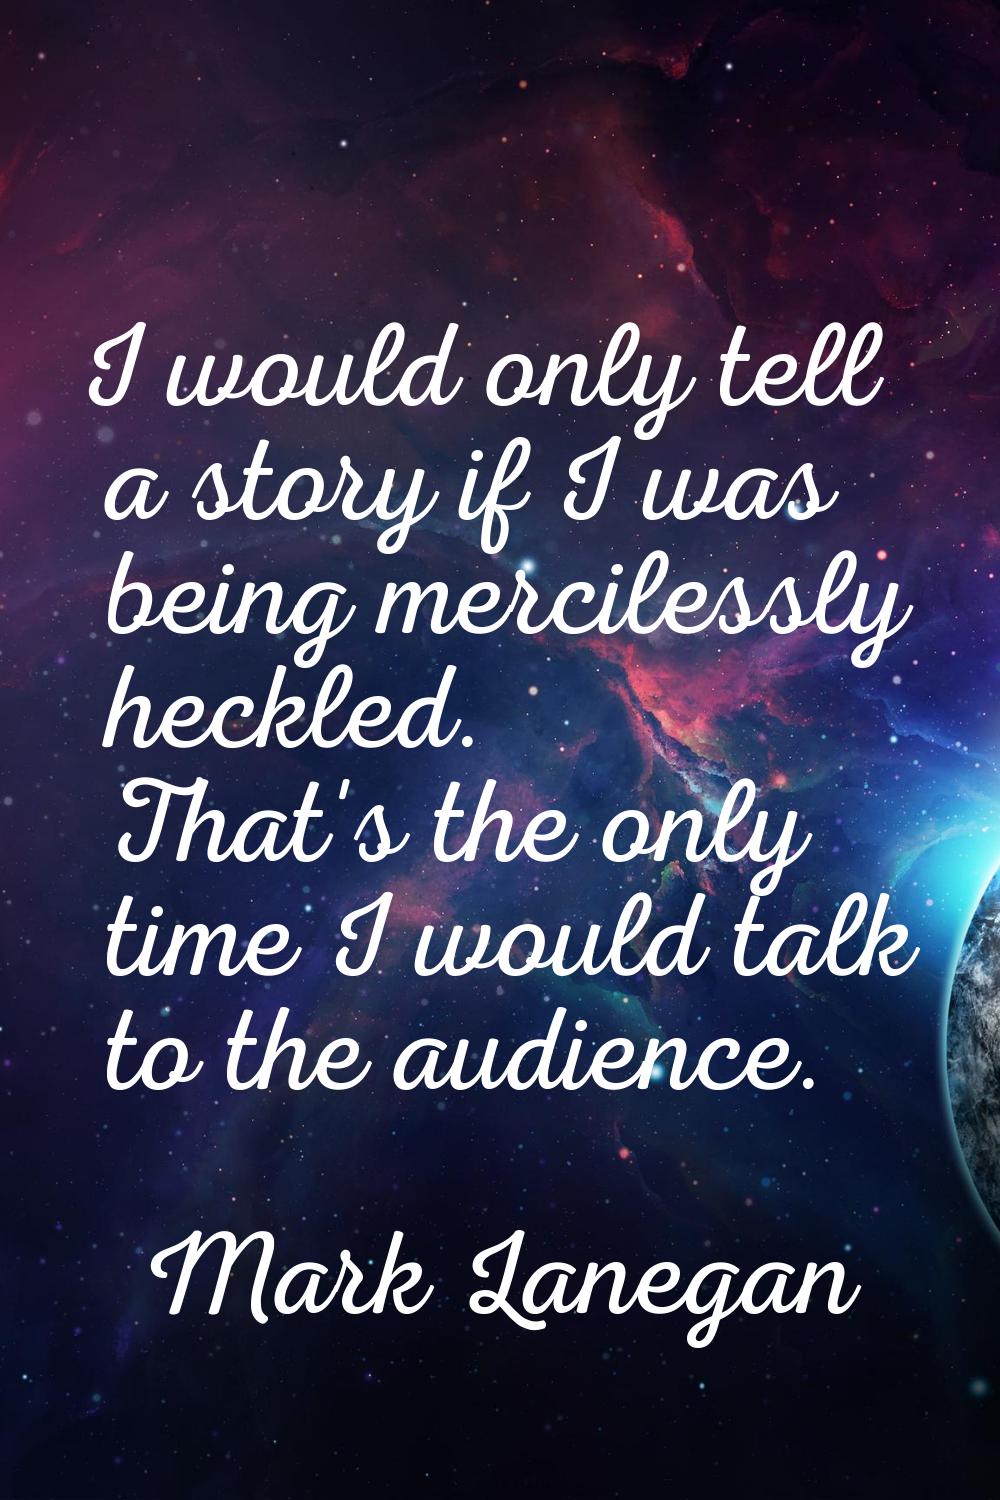 I would only tell a story if I was being mercilessly heckled. That's the only time I would talk to 